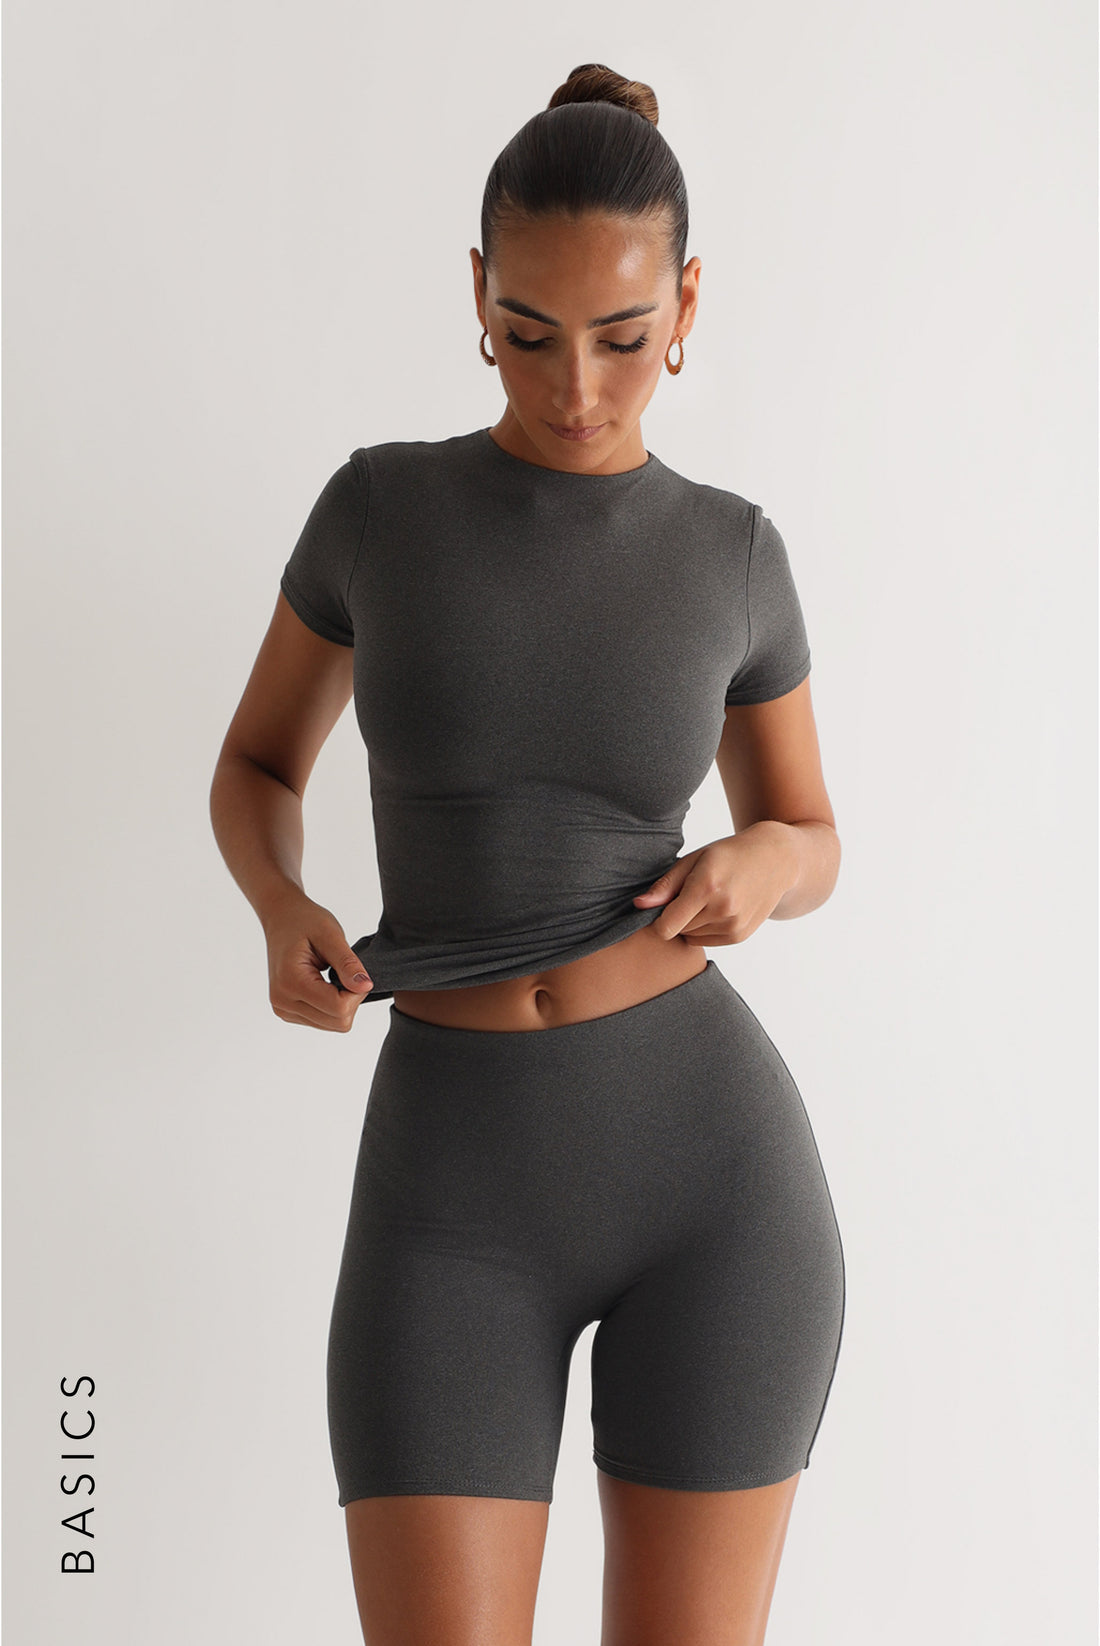 My Gray Dark – Outfit Biker Shorts Pro-Technical Online 6\